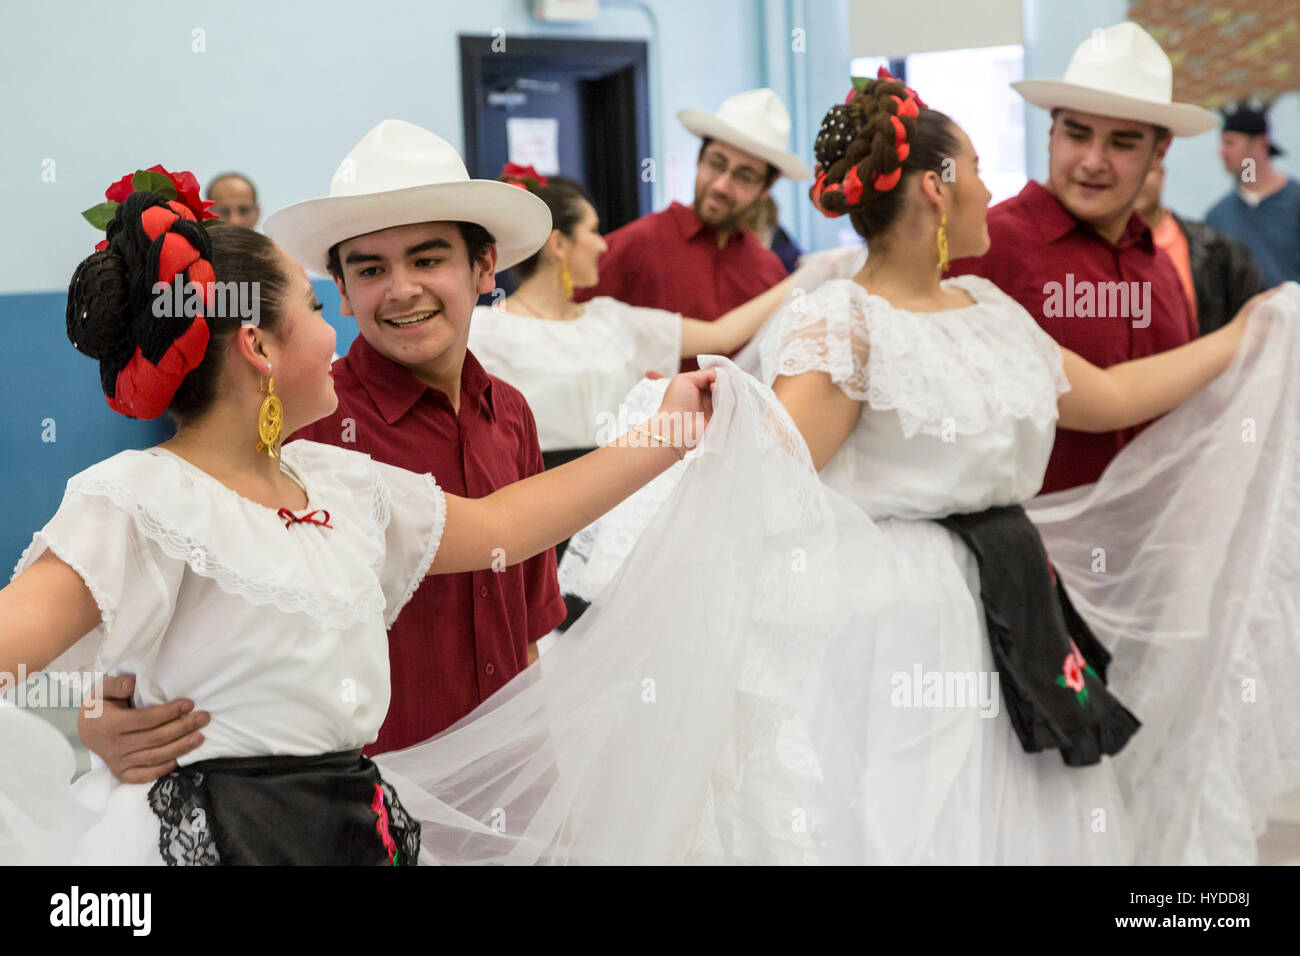 Detroit, Michigan - The Ballet Folklorico Los Renacidos performs at St. Gabriel's Catholic Church during a solidarity rally of Mexican-American and Ar Stock Photo